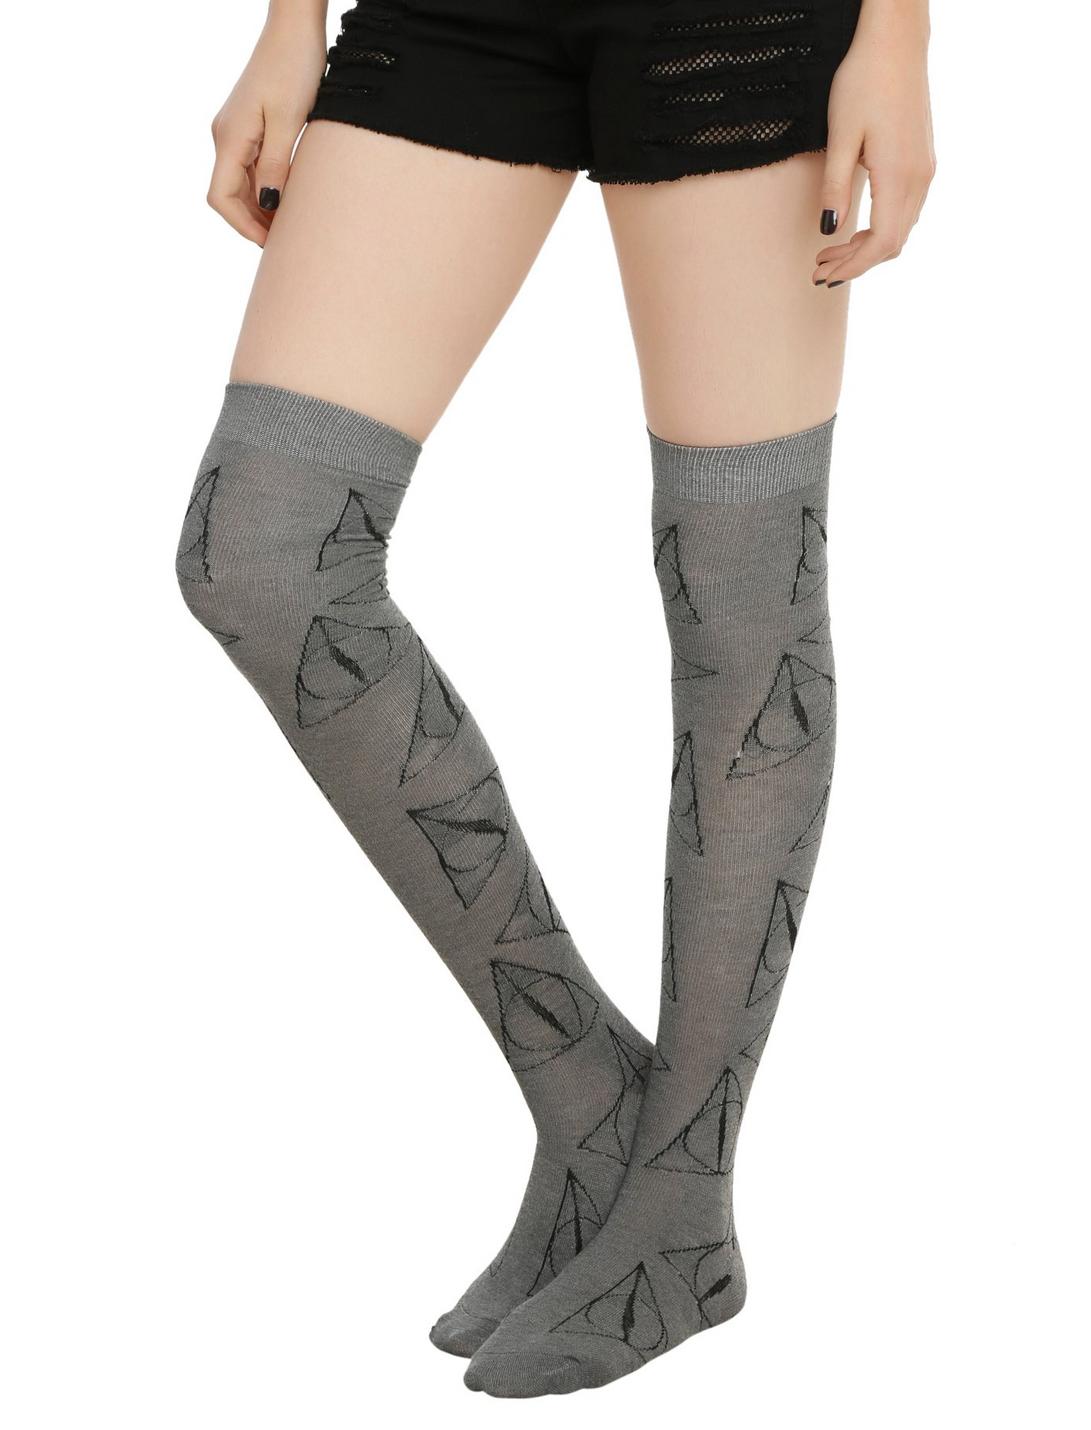 Harry Potter Deathly Hallows Over-The-Knee Socks, , hi-res